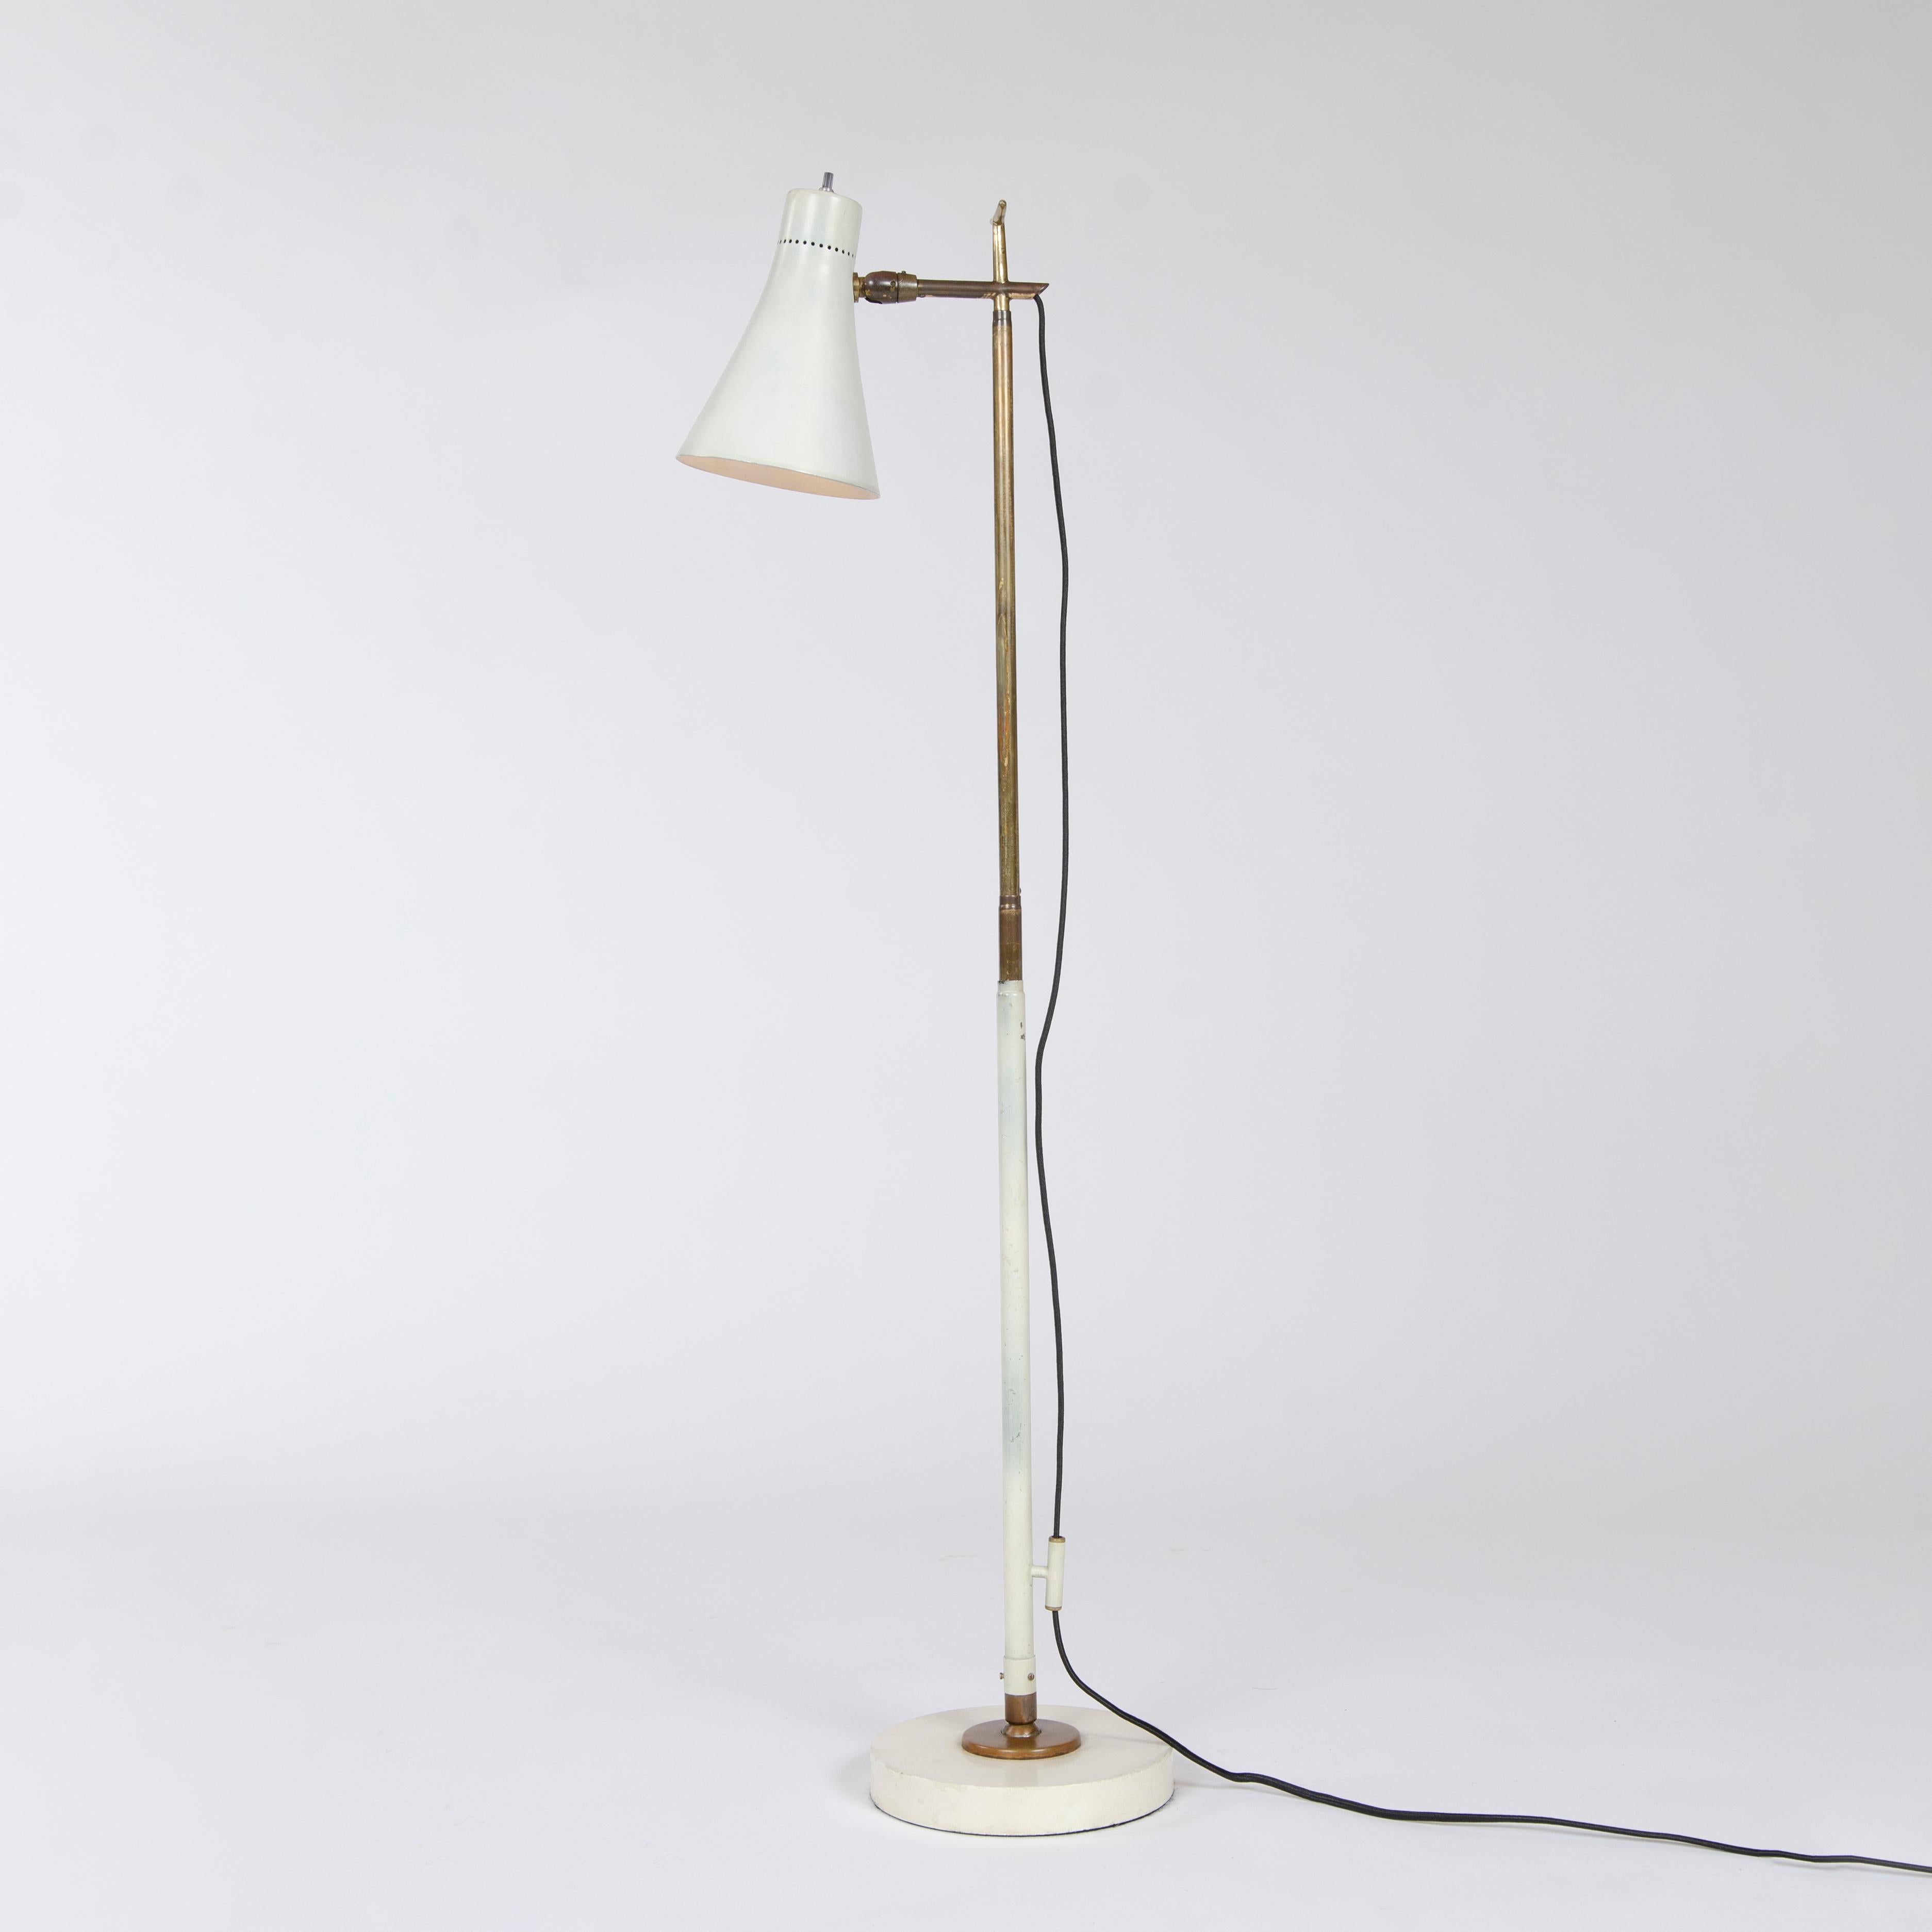 An early telescoping floor / desk lamp with a pivoting cone shaped shade on a brass and enameled steel stem with a ball-and-socket jointed disc base.